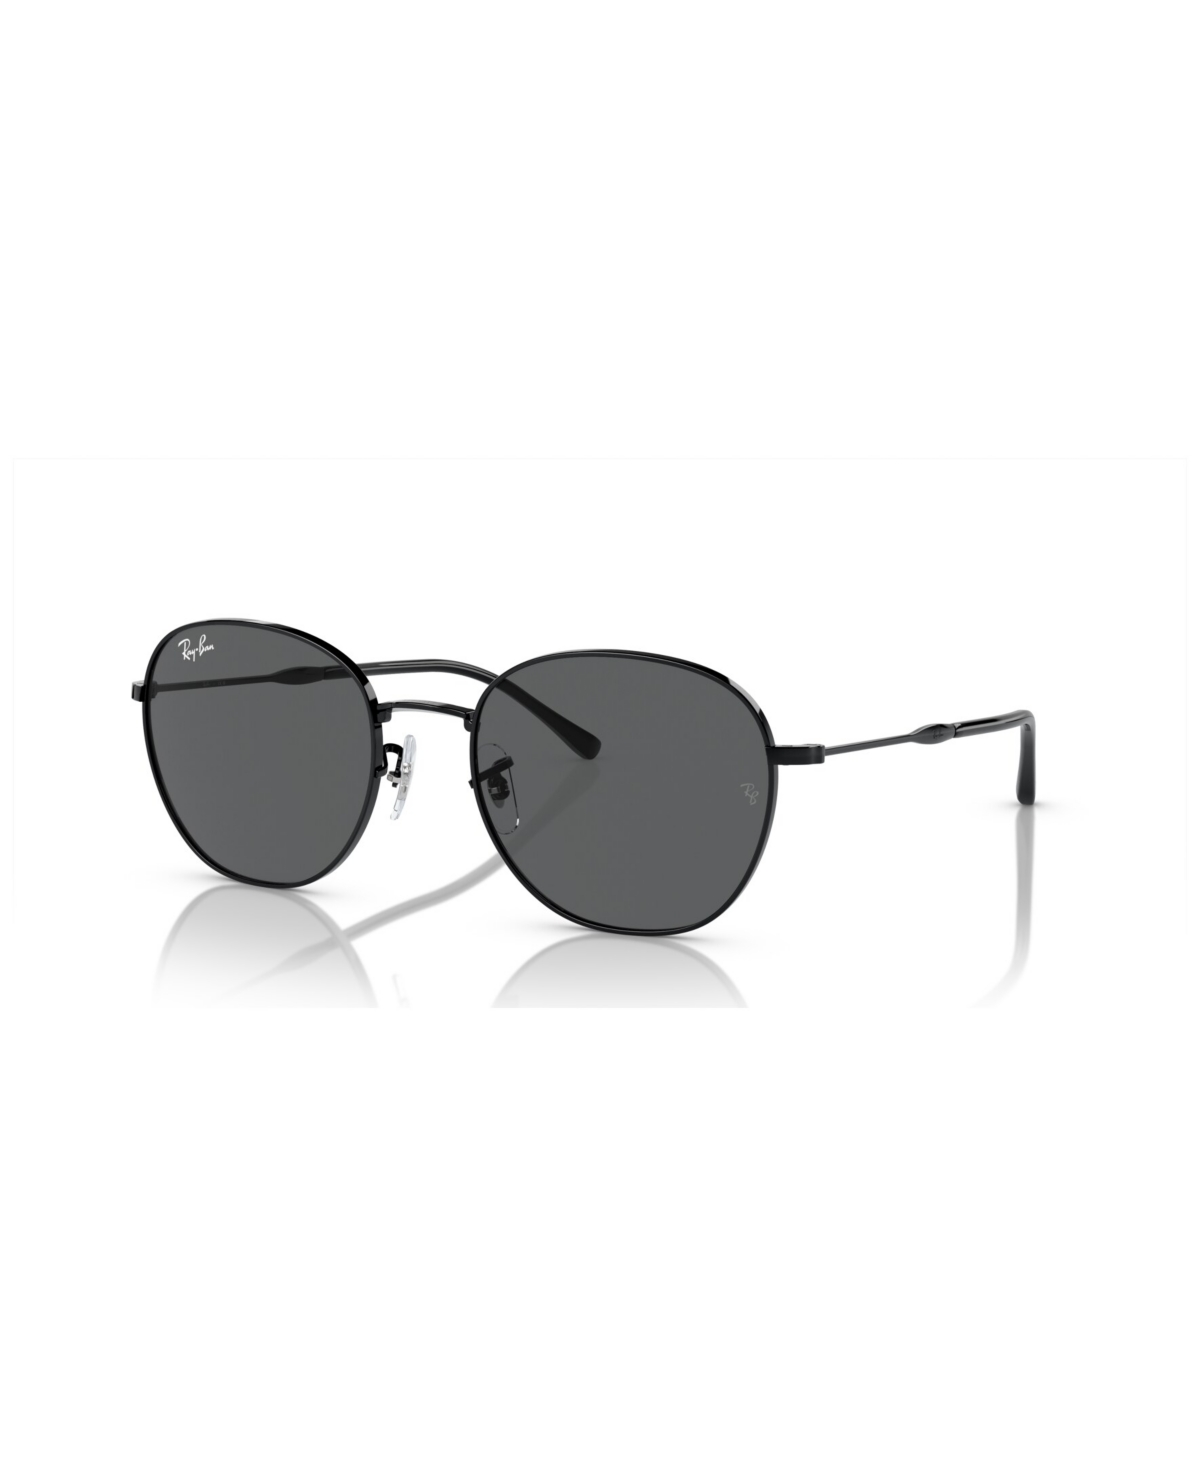 Ray Ban Unisex Sunglasses Rb3809 In Black